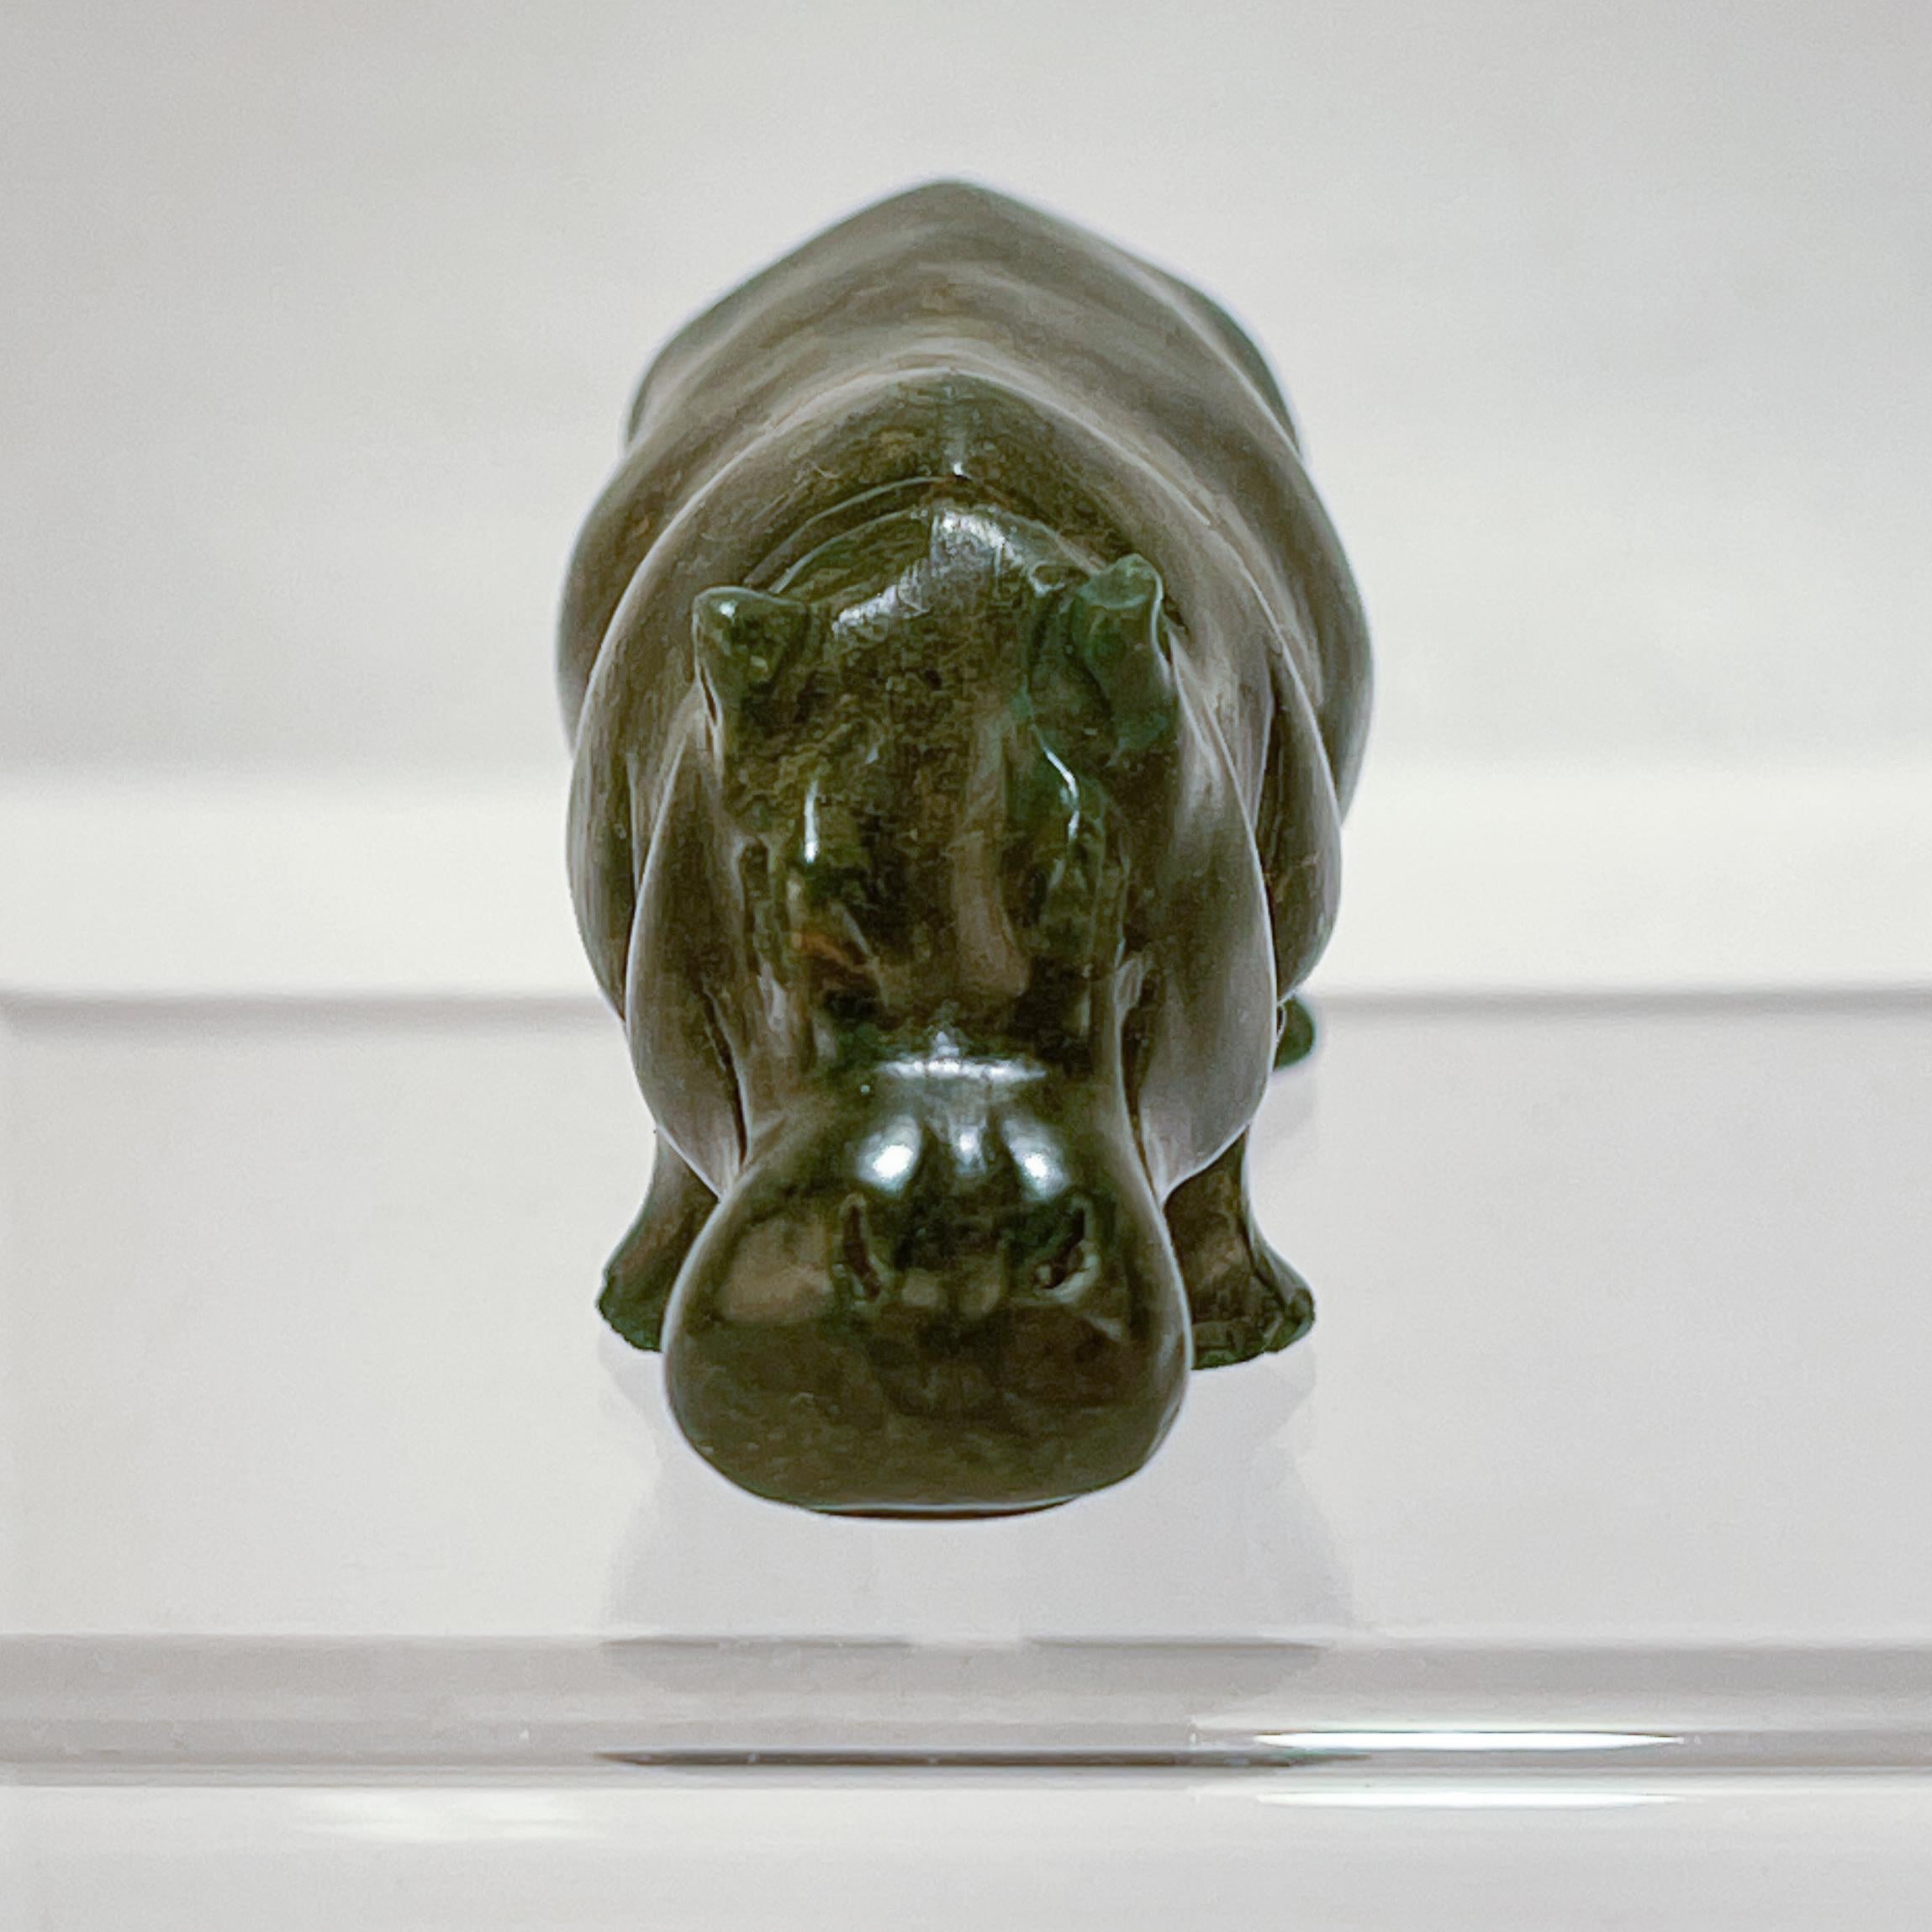 house hippo figurine meaning